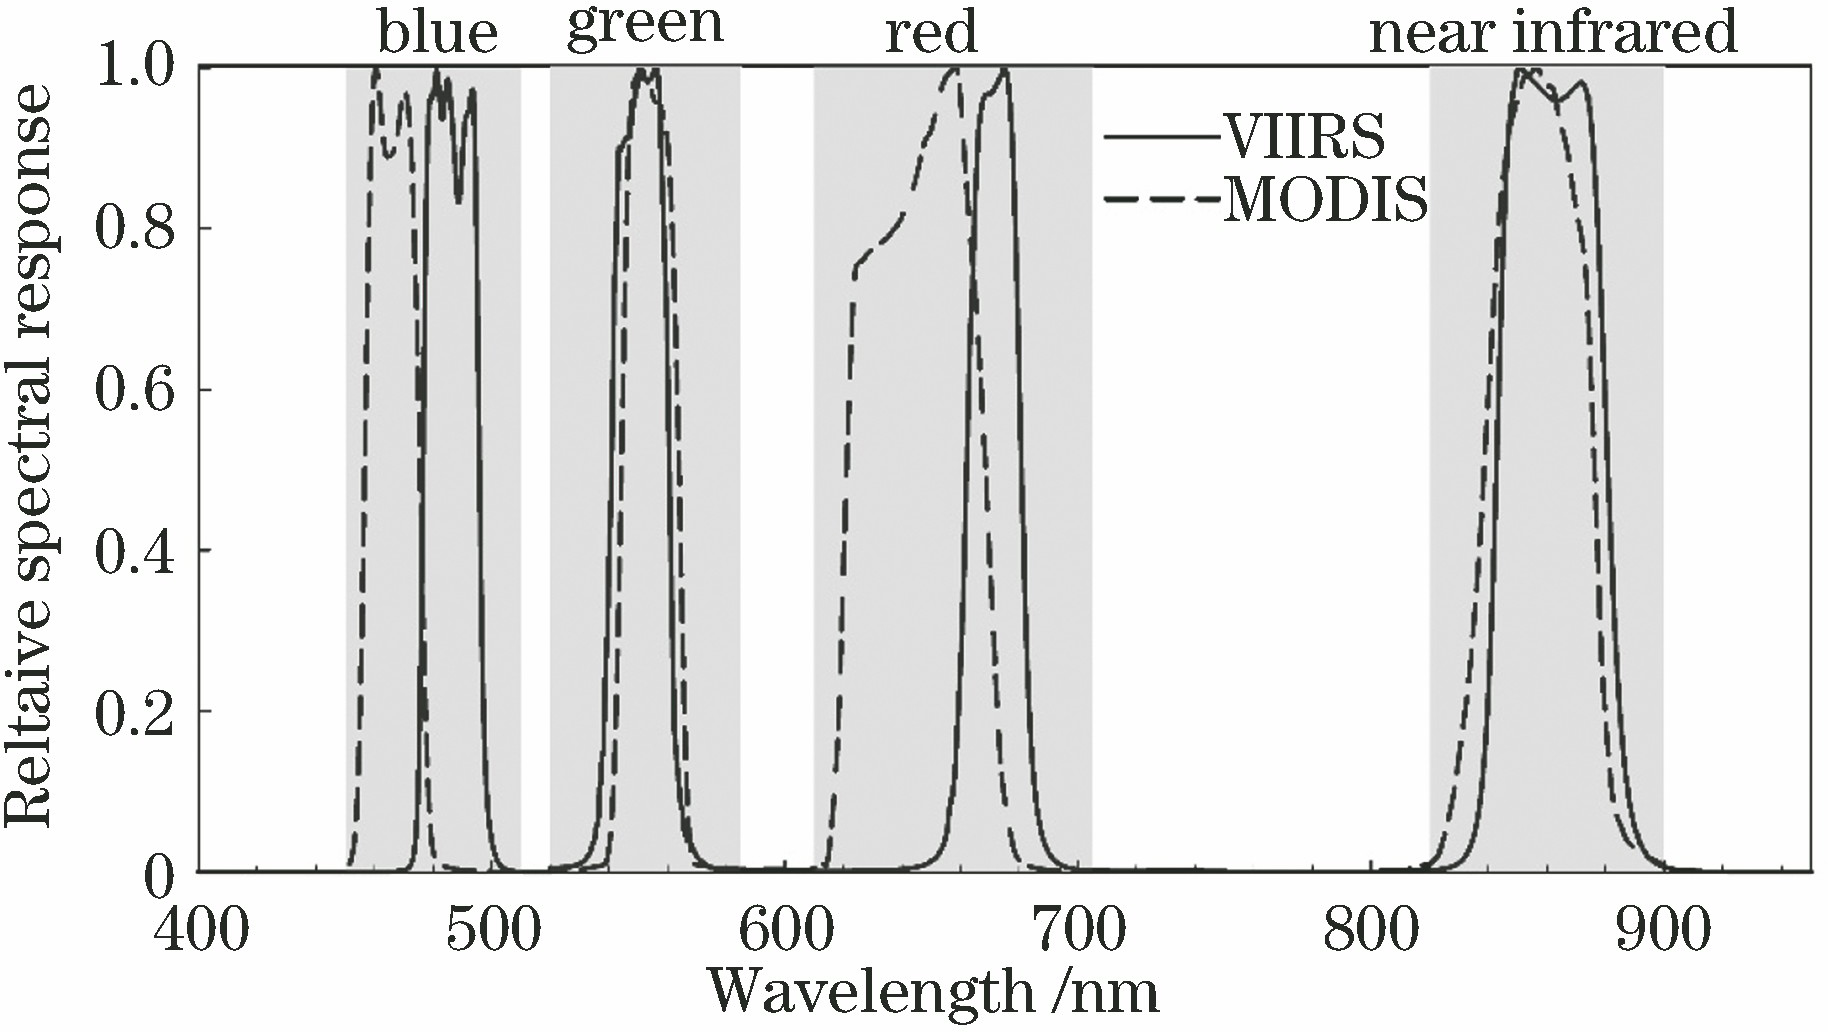 Spectral response curves of VIIRS and MODIS sensors